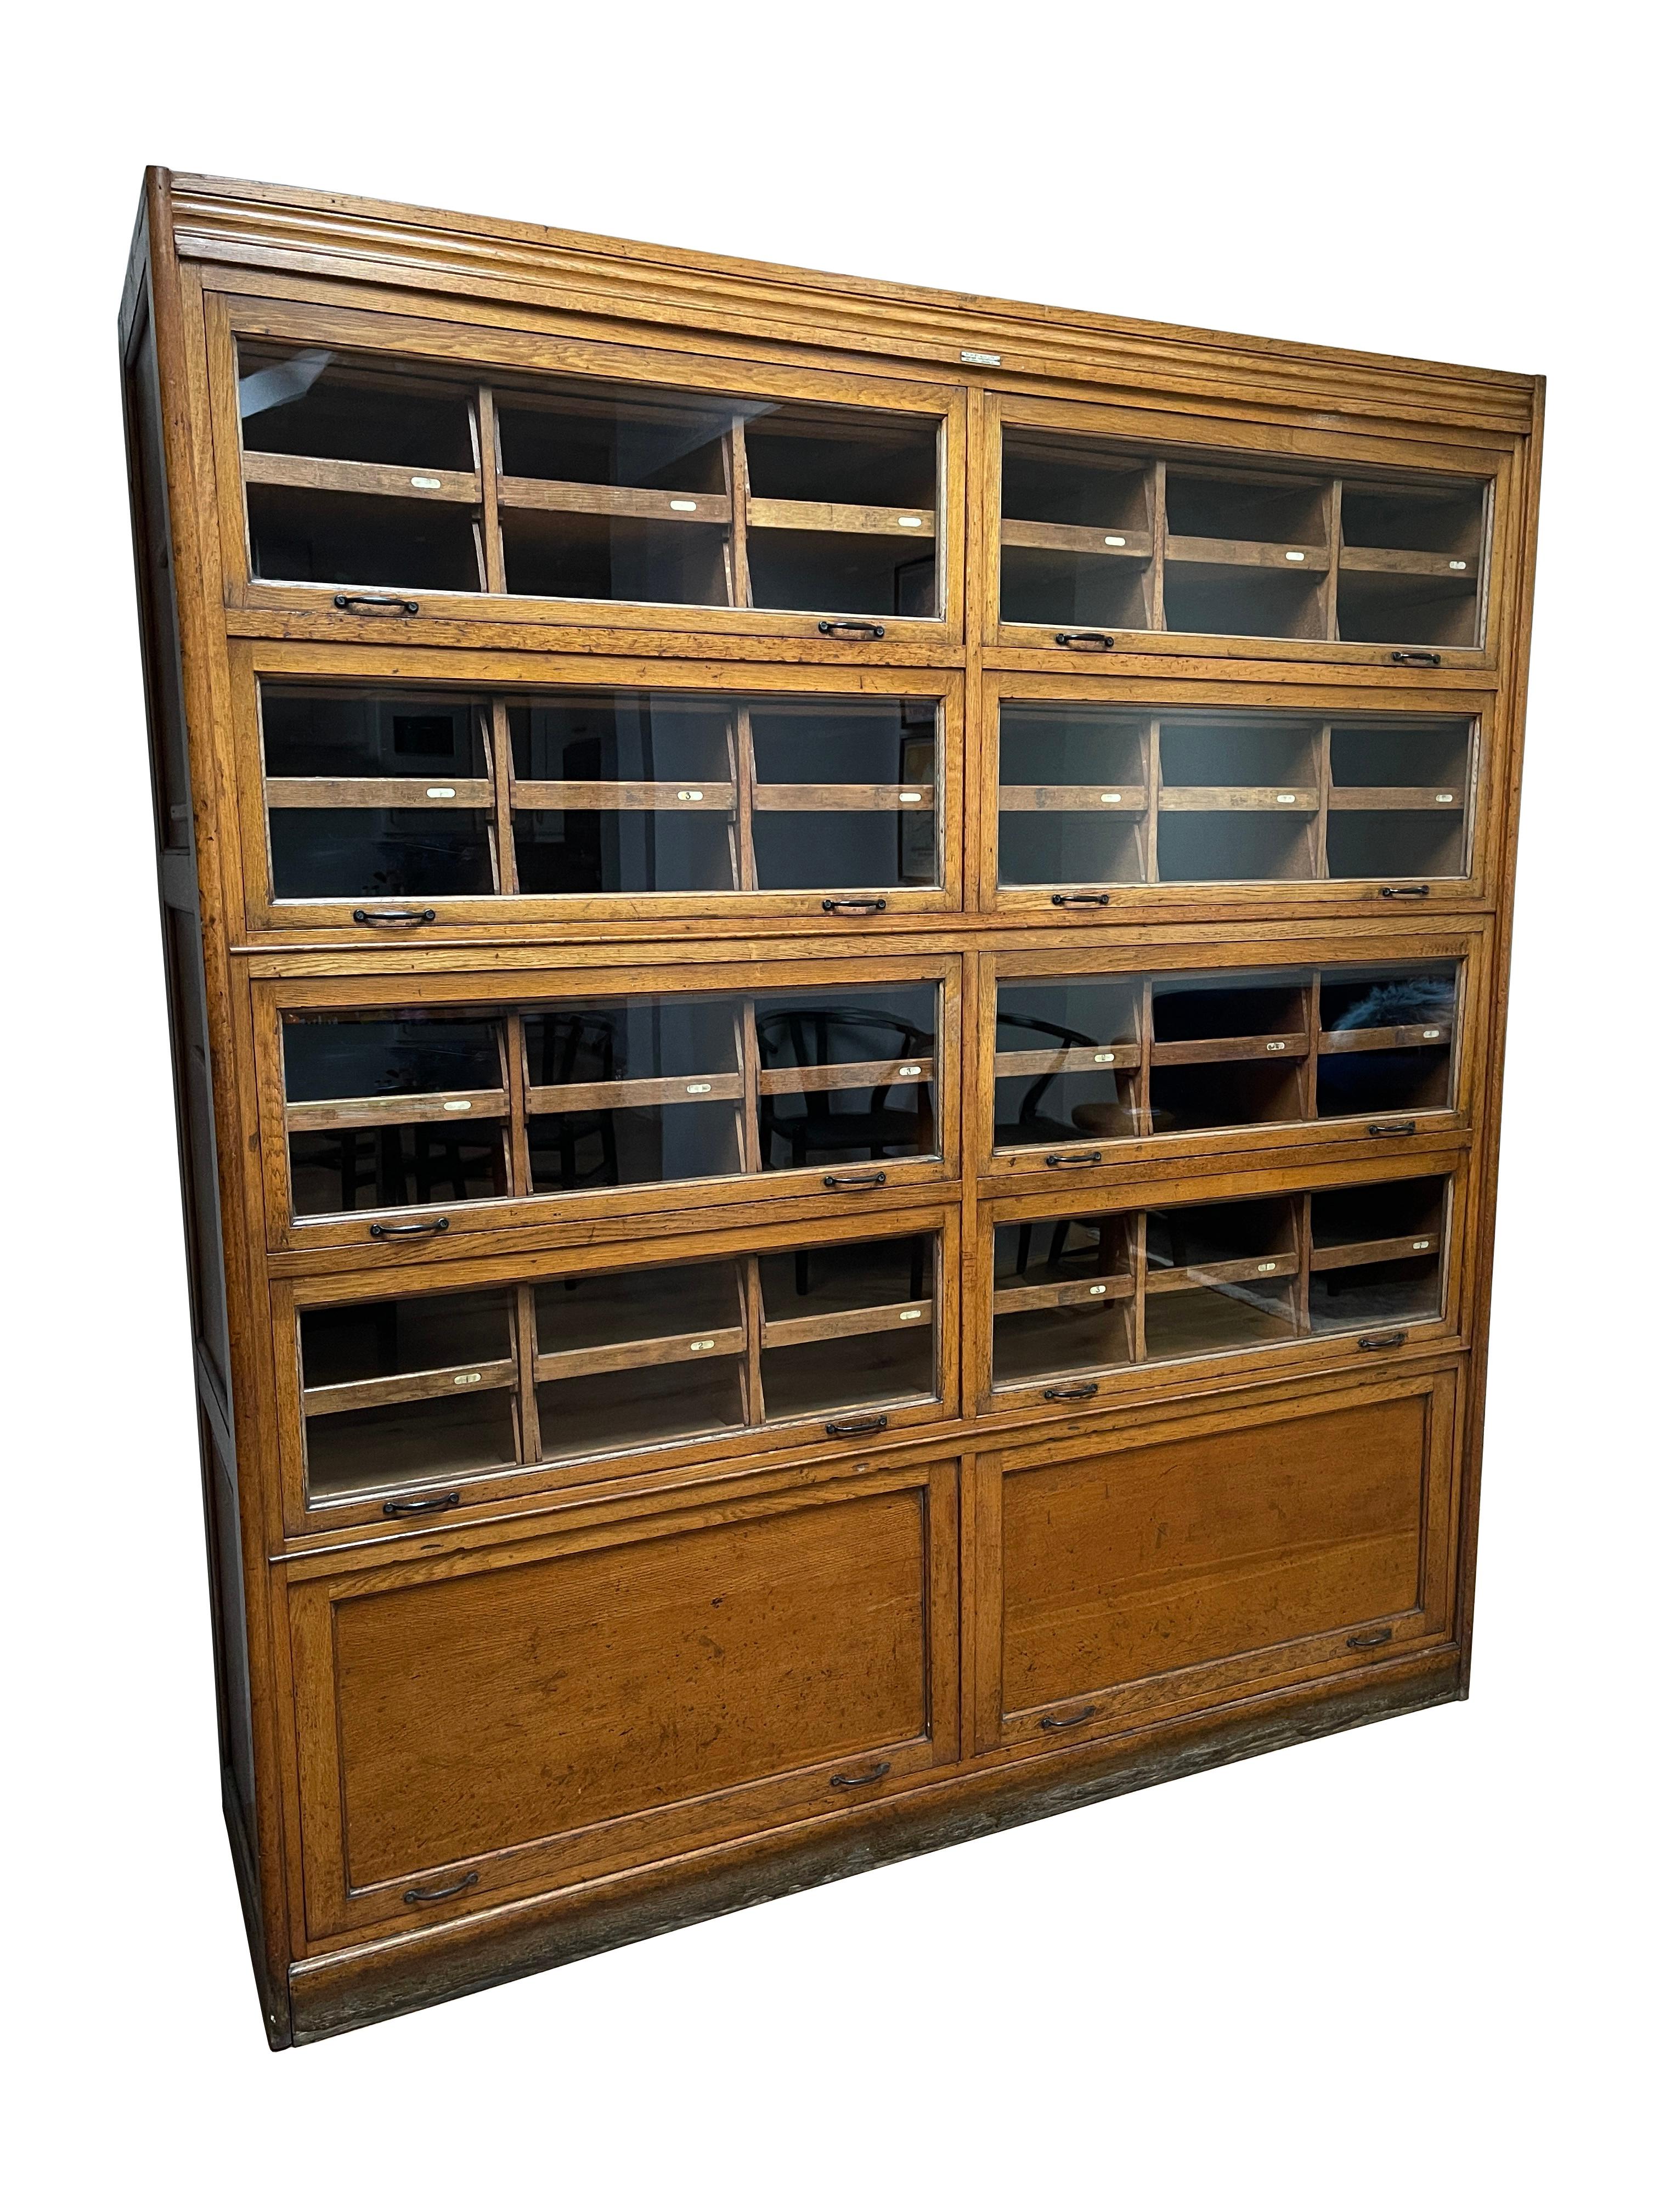 - A large and wonderful oak haberdashery glass display cabinet, English circa 1940. 
- The cabinet is marked by the illustrious 'Dudley & Co Ltd. Showcase Manufacturers Holloway. London. N.7.'
- A total of 48 dovetail jointed open drawers embossed